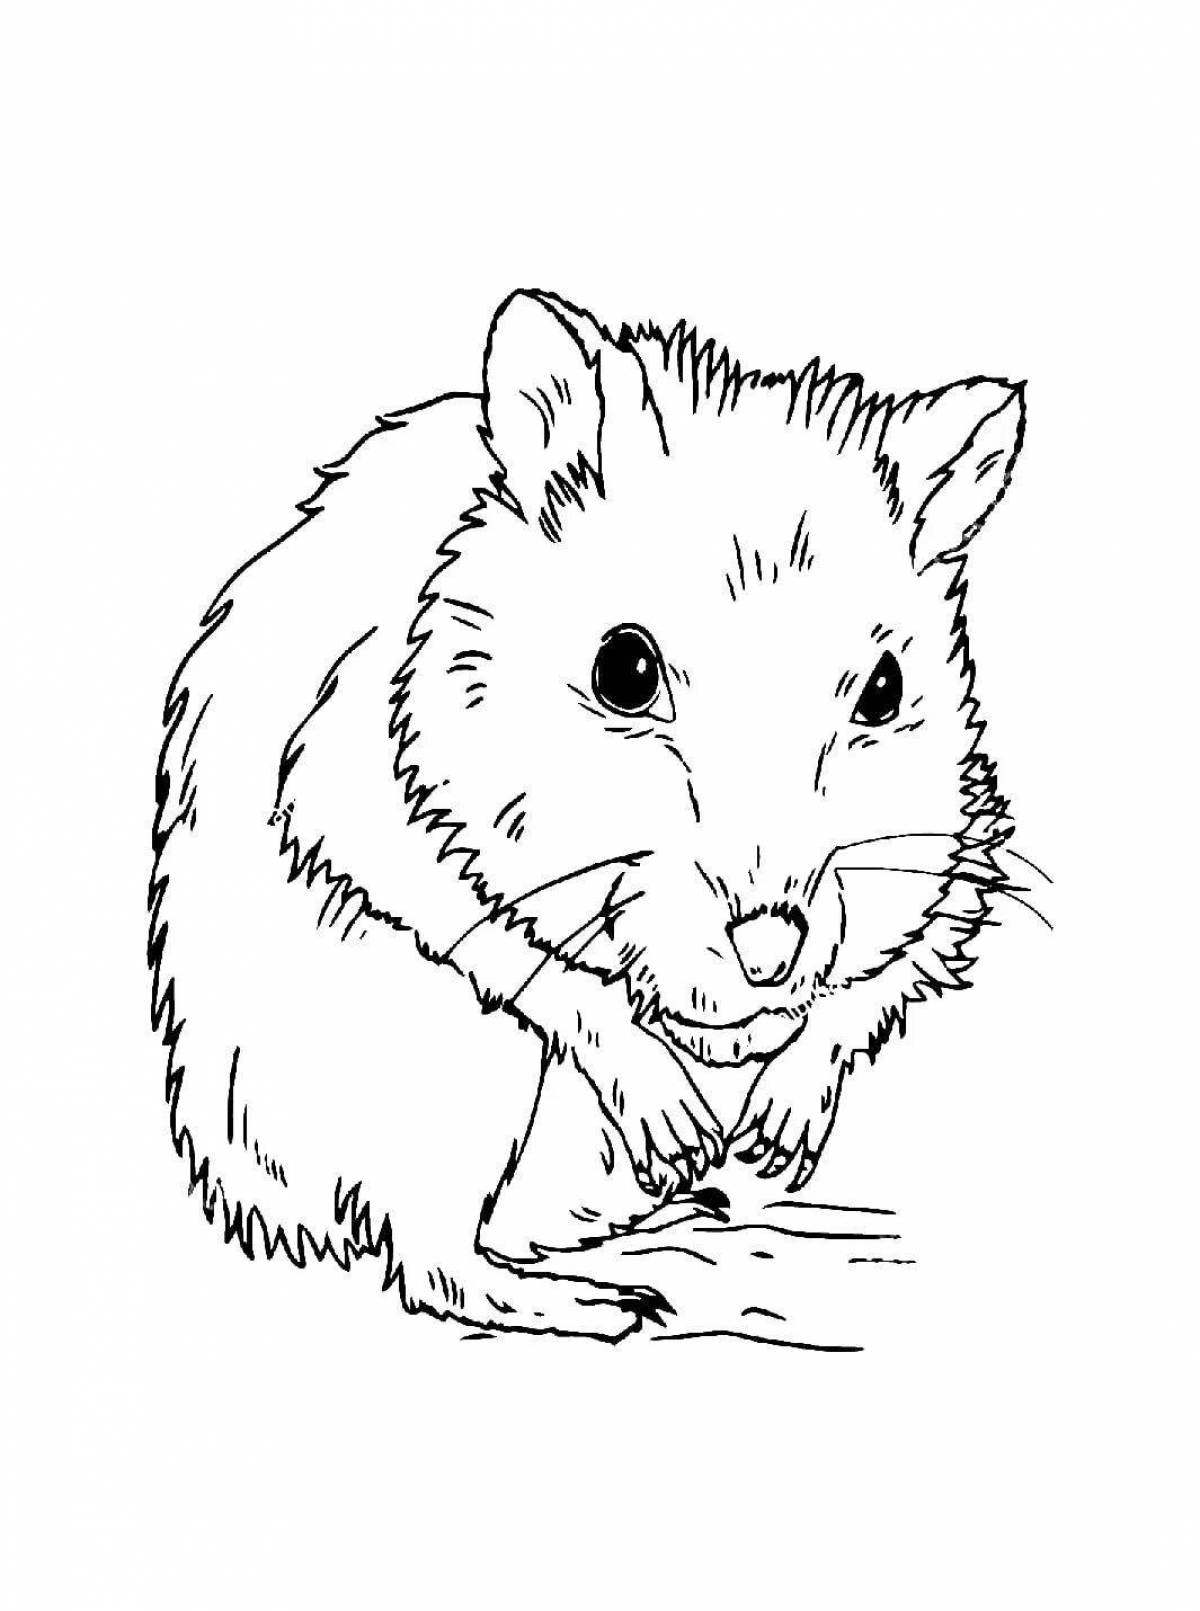 Coloring page adorable Djungarian hamster